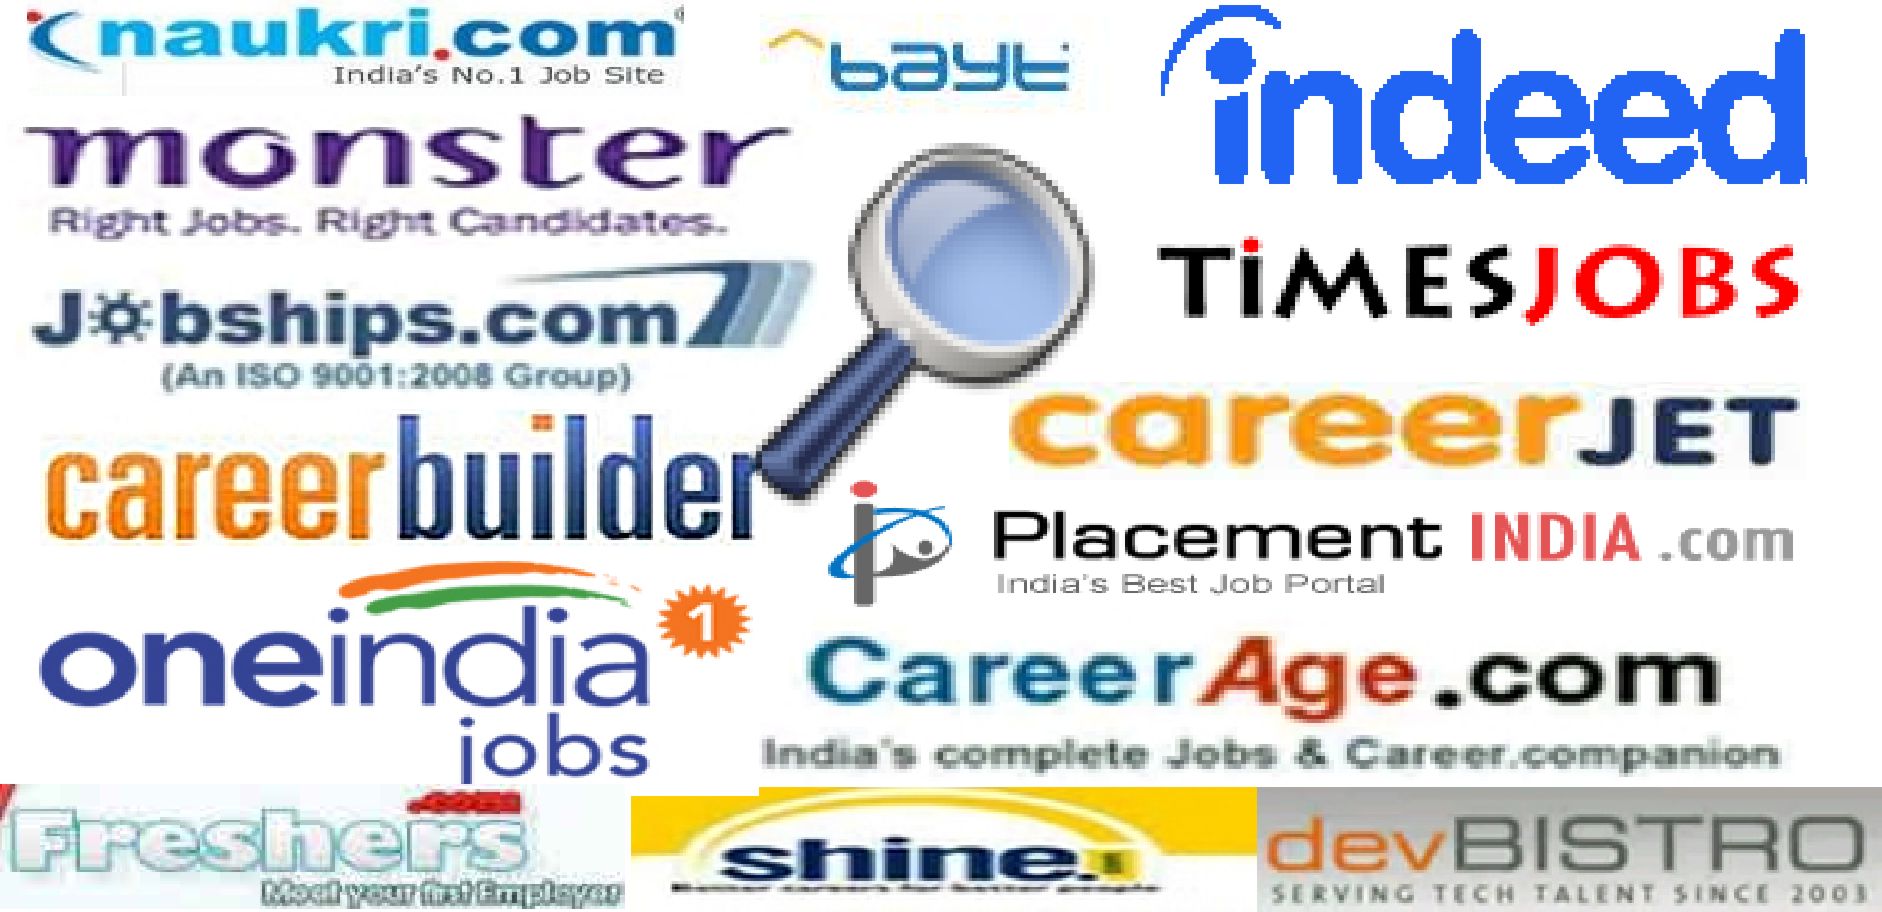 Job search engines northern california